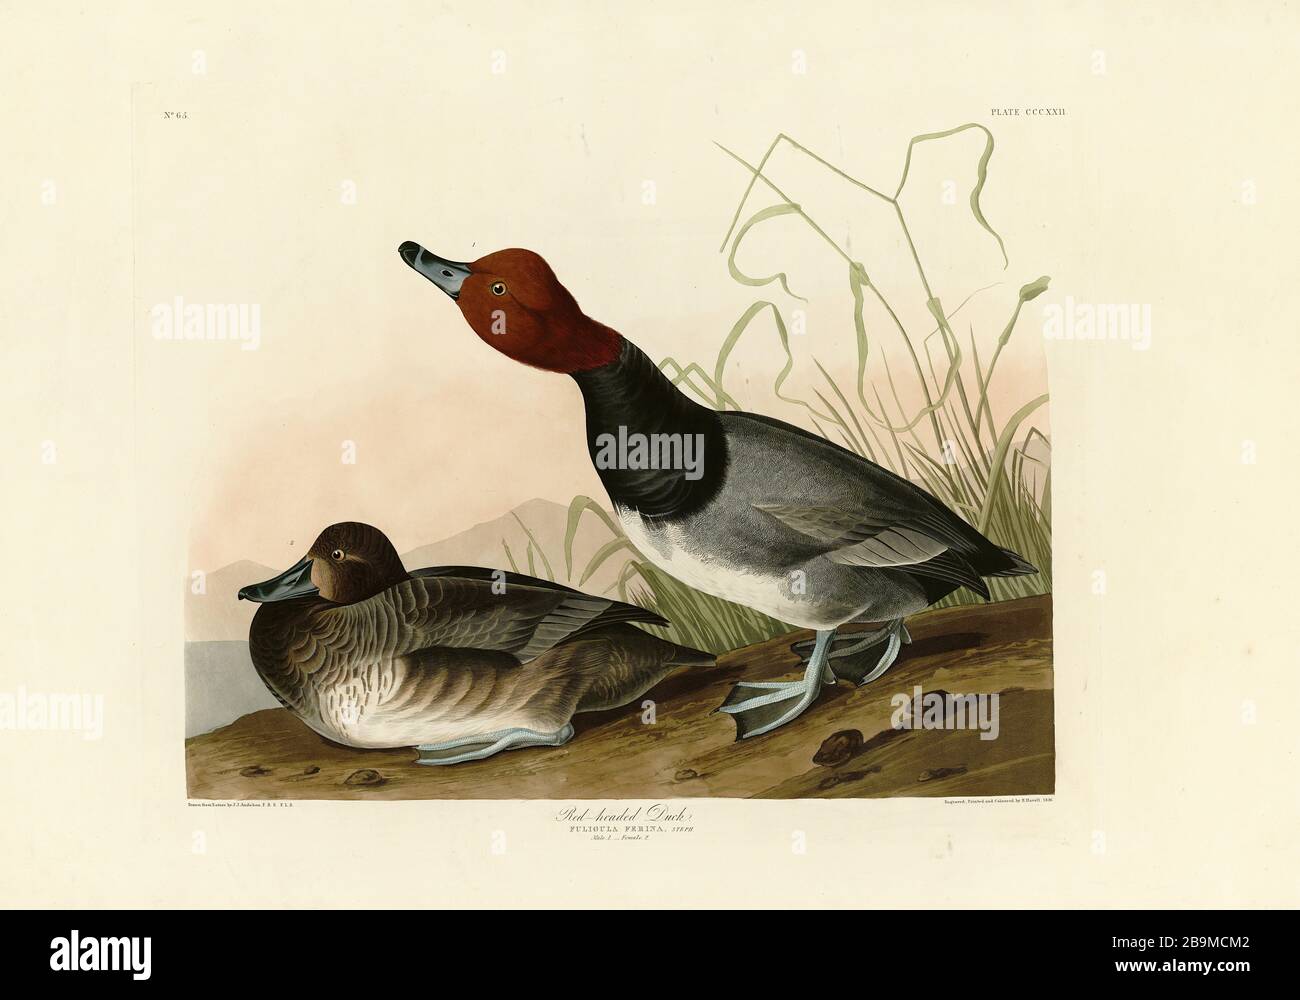 Plate 322 Red-headed Duck (Redhead) from The Birds of America folio (1827–1839) by John James Audubon - Very high resolution and quality edited image Stock Photo